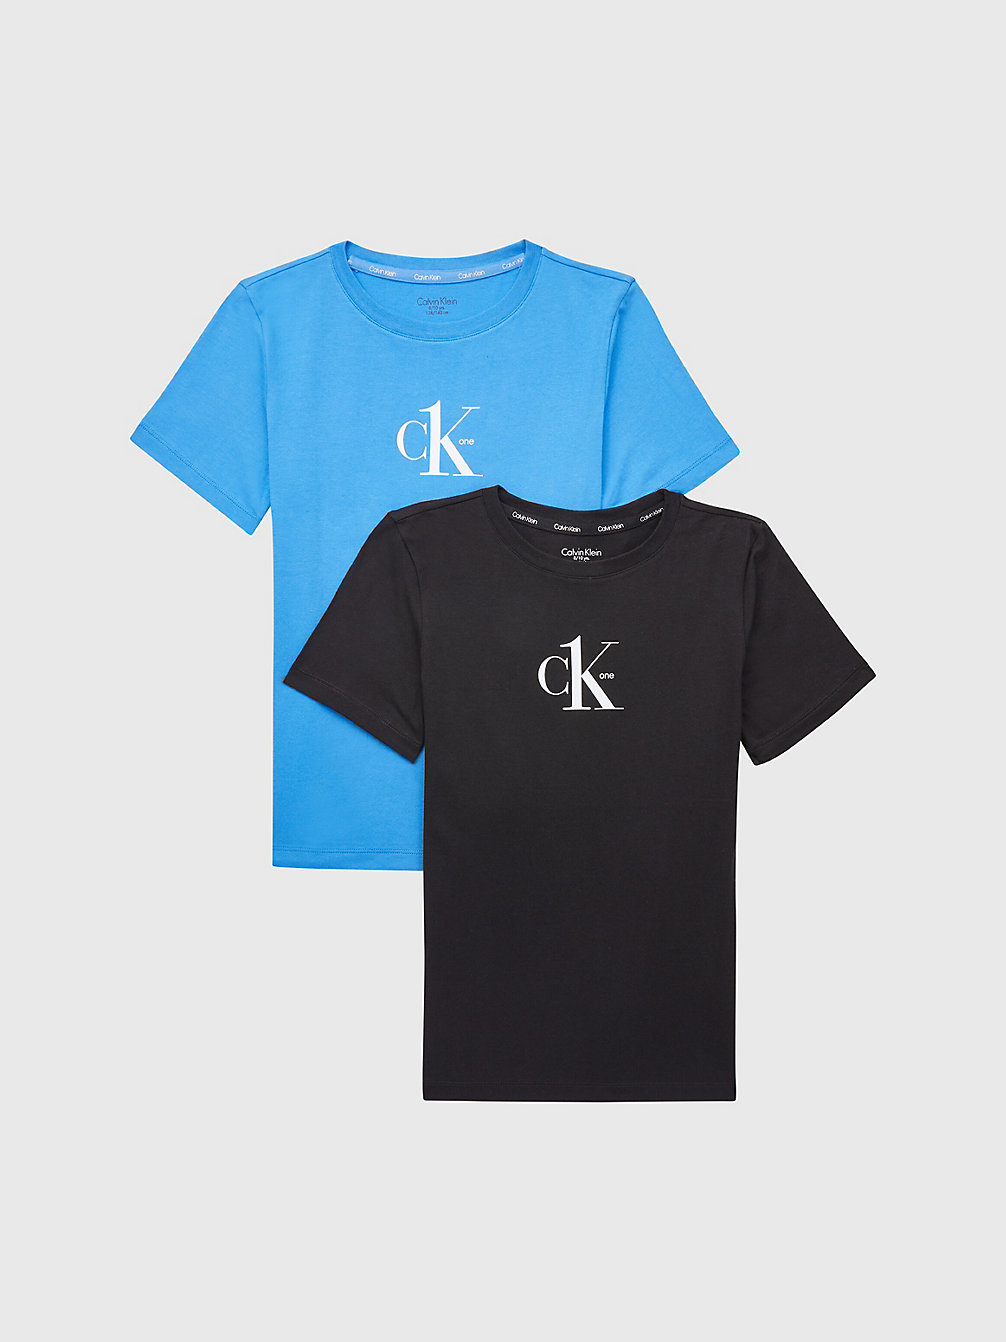 ELECTRICAQUA/PVHBLACK 2 Pack Boys T-Shirts - CK One undefined boys Calvin Klein